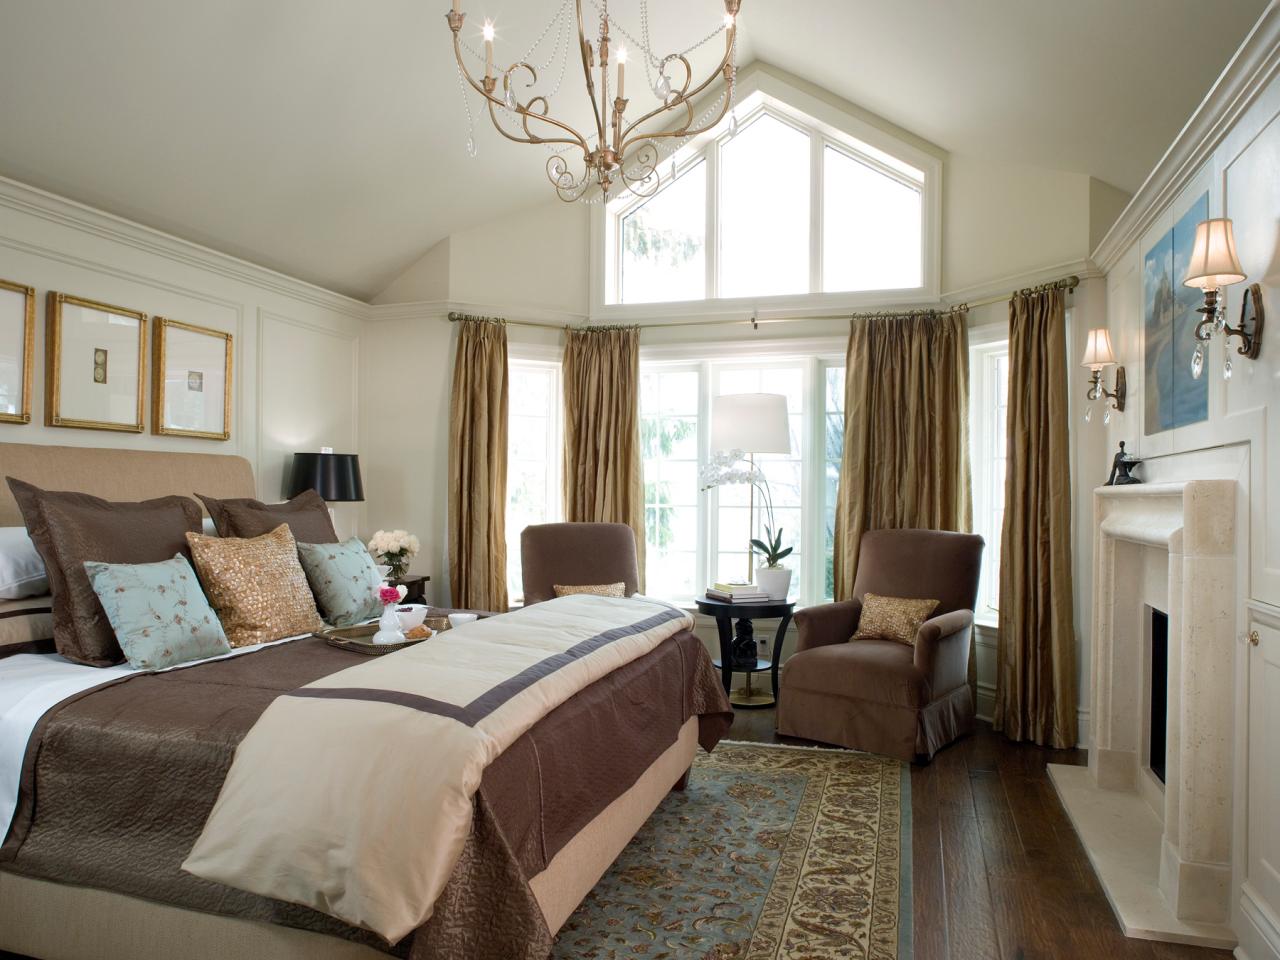 10 Divine Master Bedrooms by Candice Olson | Bedrooms ...